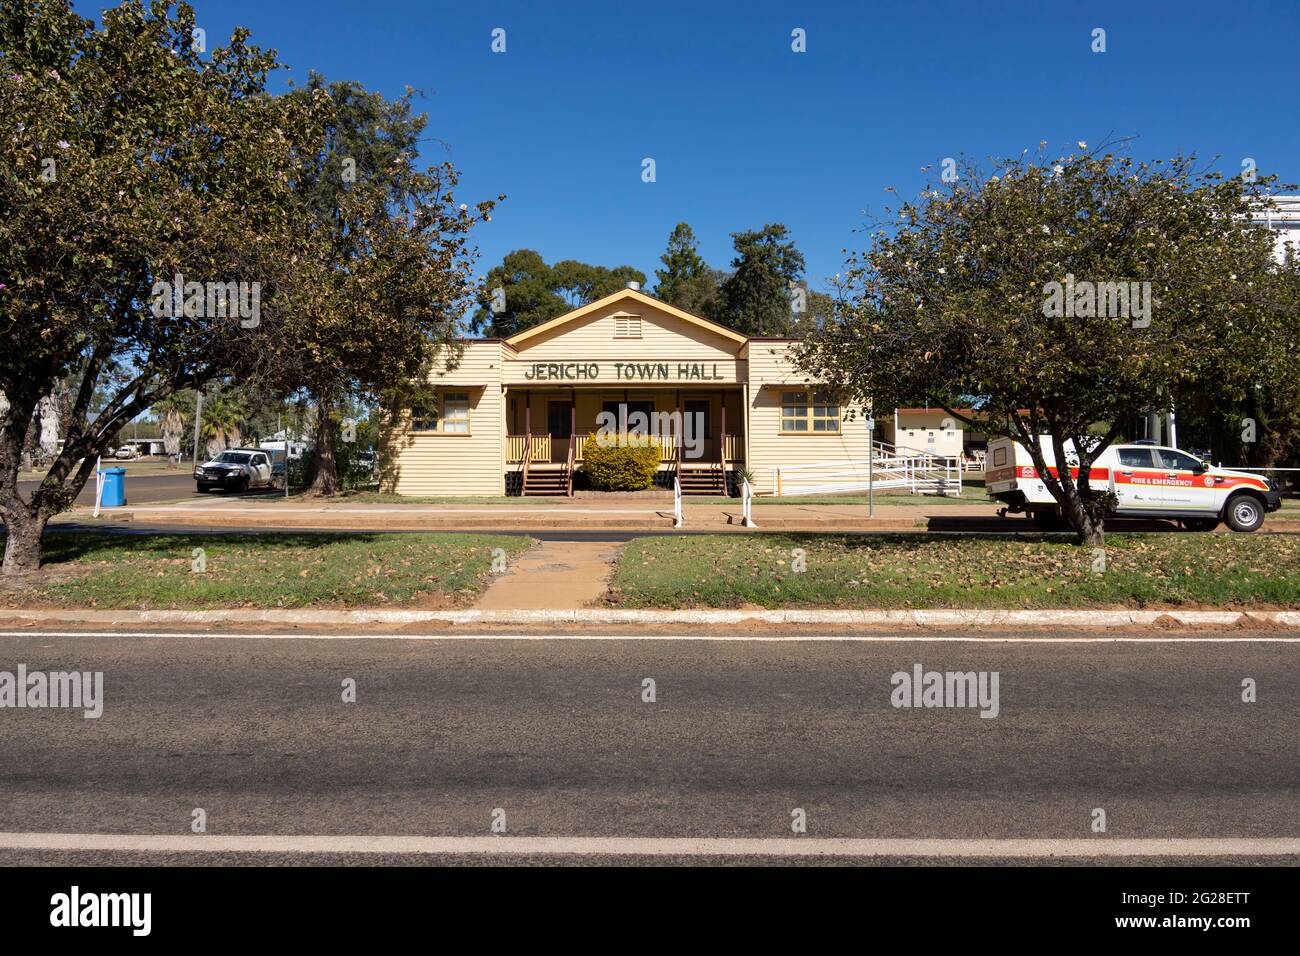 Town hall council building in Jericho, Western Queensland, built of weatherboard in the old Queenslander style. Stock Photo